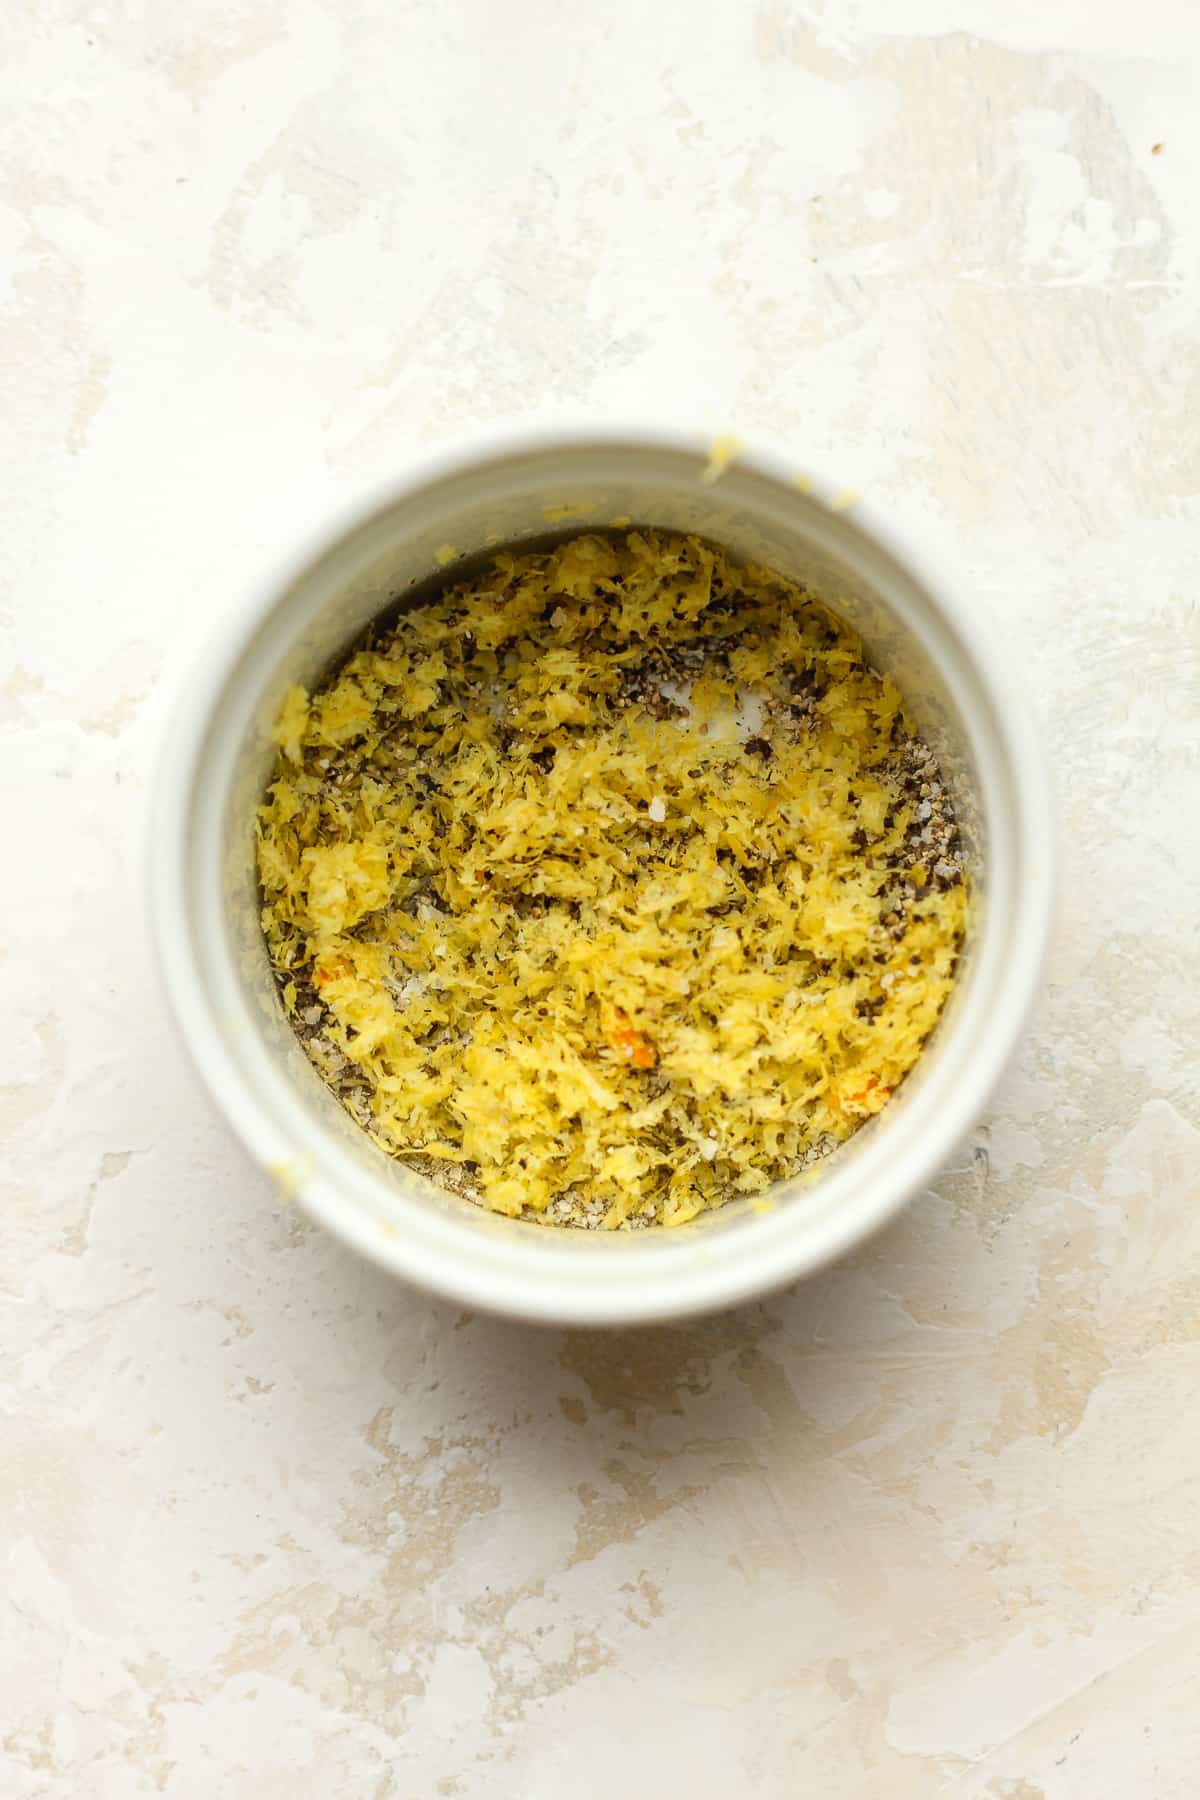 The lemon and seasonings in a small bowl.